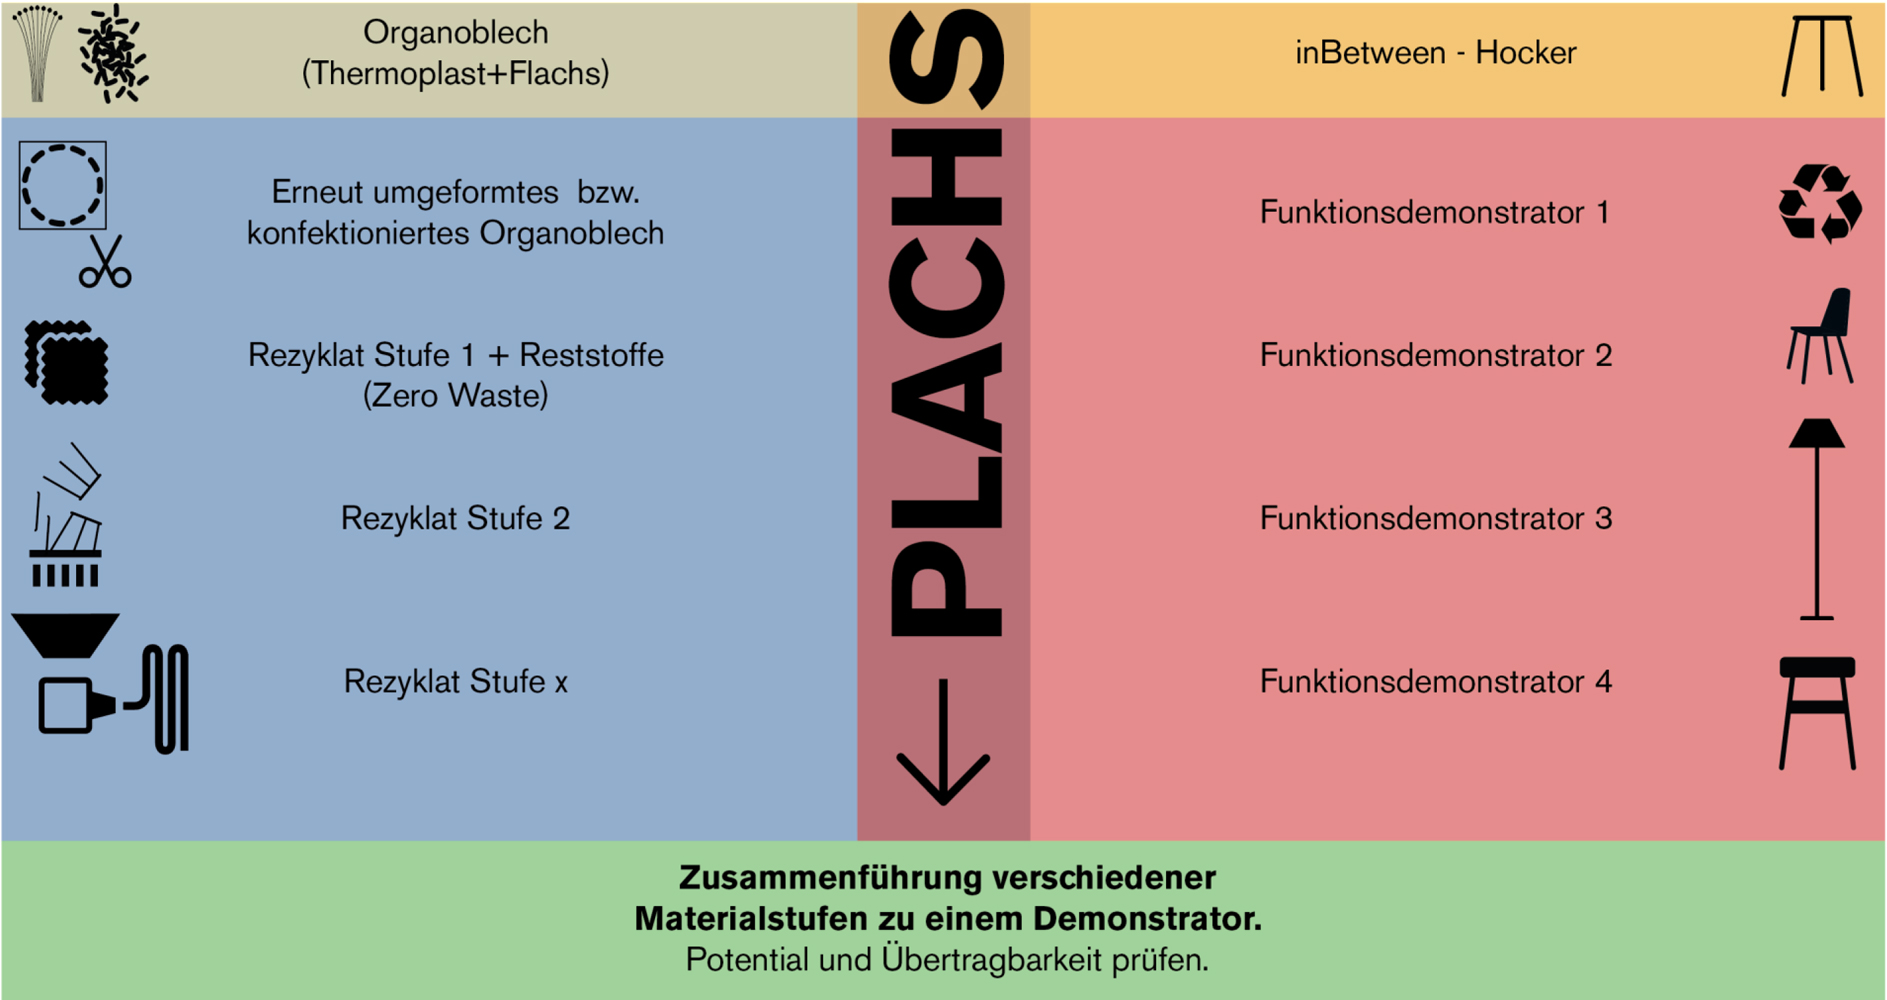 The left side of the graphic shows a number of material stages (compounds, organic sheet, various recyclates), whilst the right side shows a number of functional demonstrators (stool, chair, lamp).